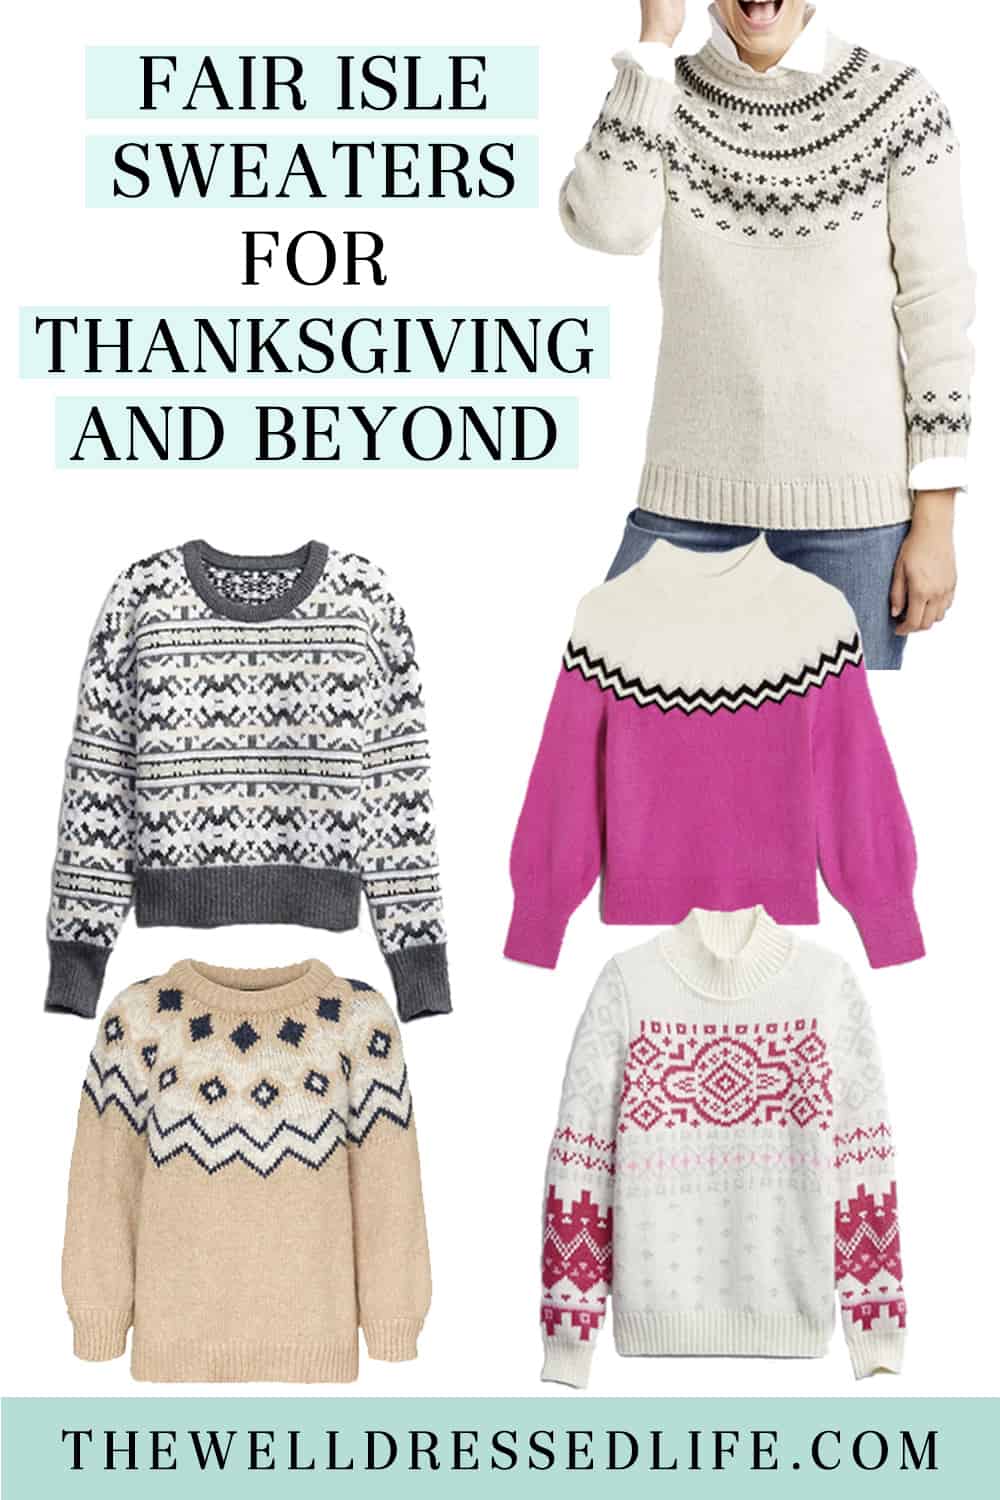 5 Fair Isle Sweaters for Thanksgiving and Beyond